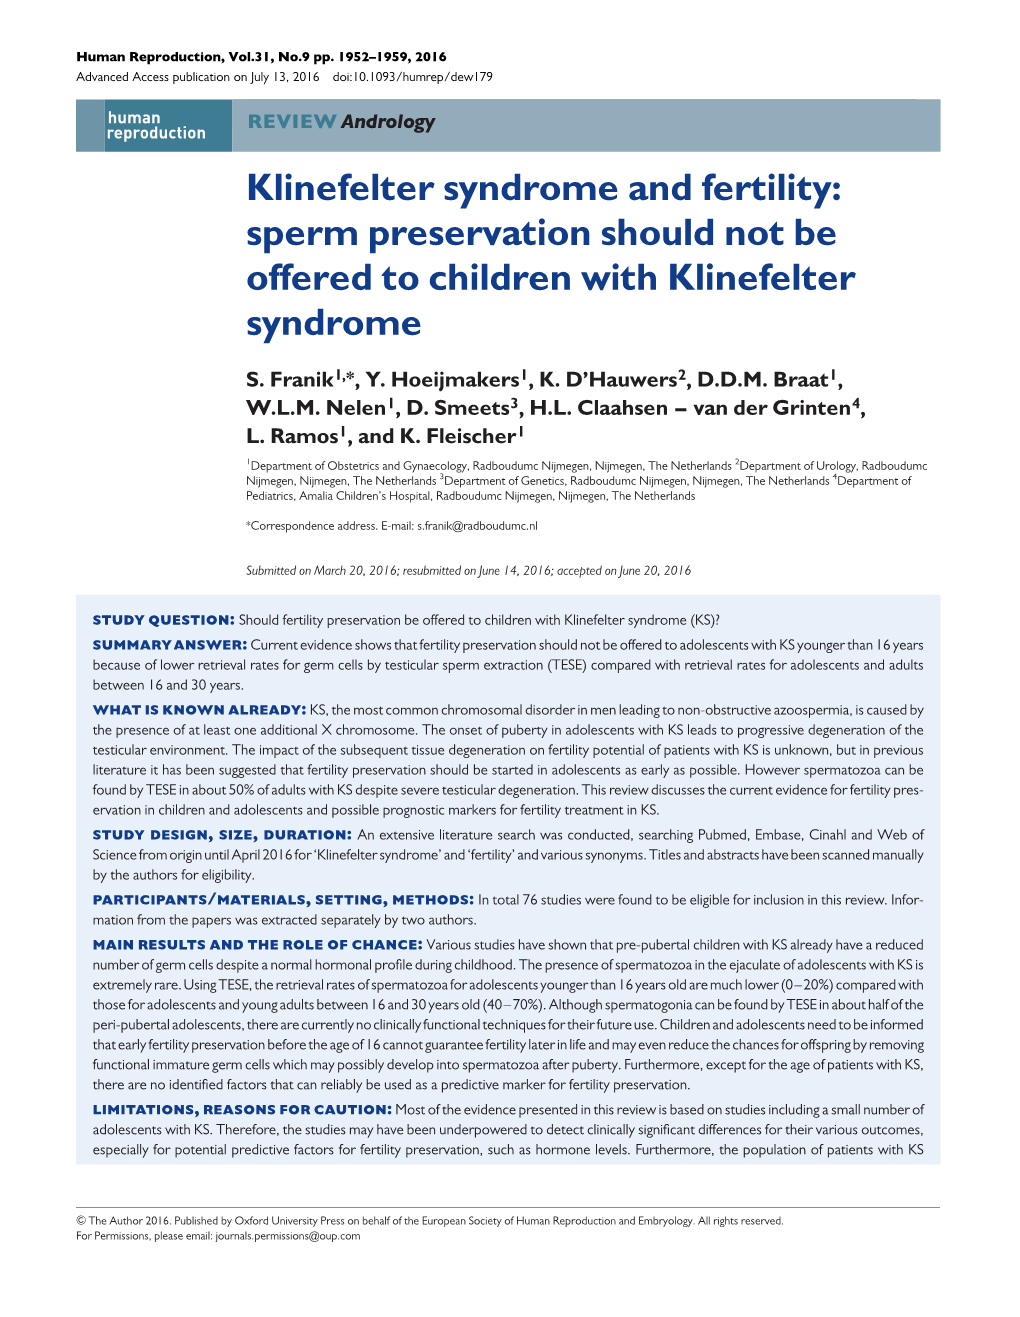 Klinefelter Syndrome and Fertility: Sperm Preservation Should Not Be Offered to Children with Klinefelter Syndrome